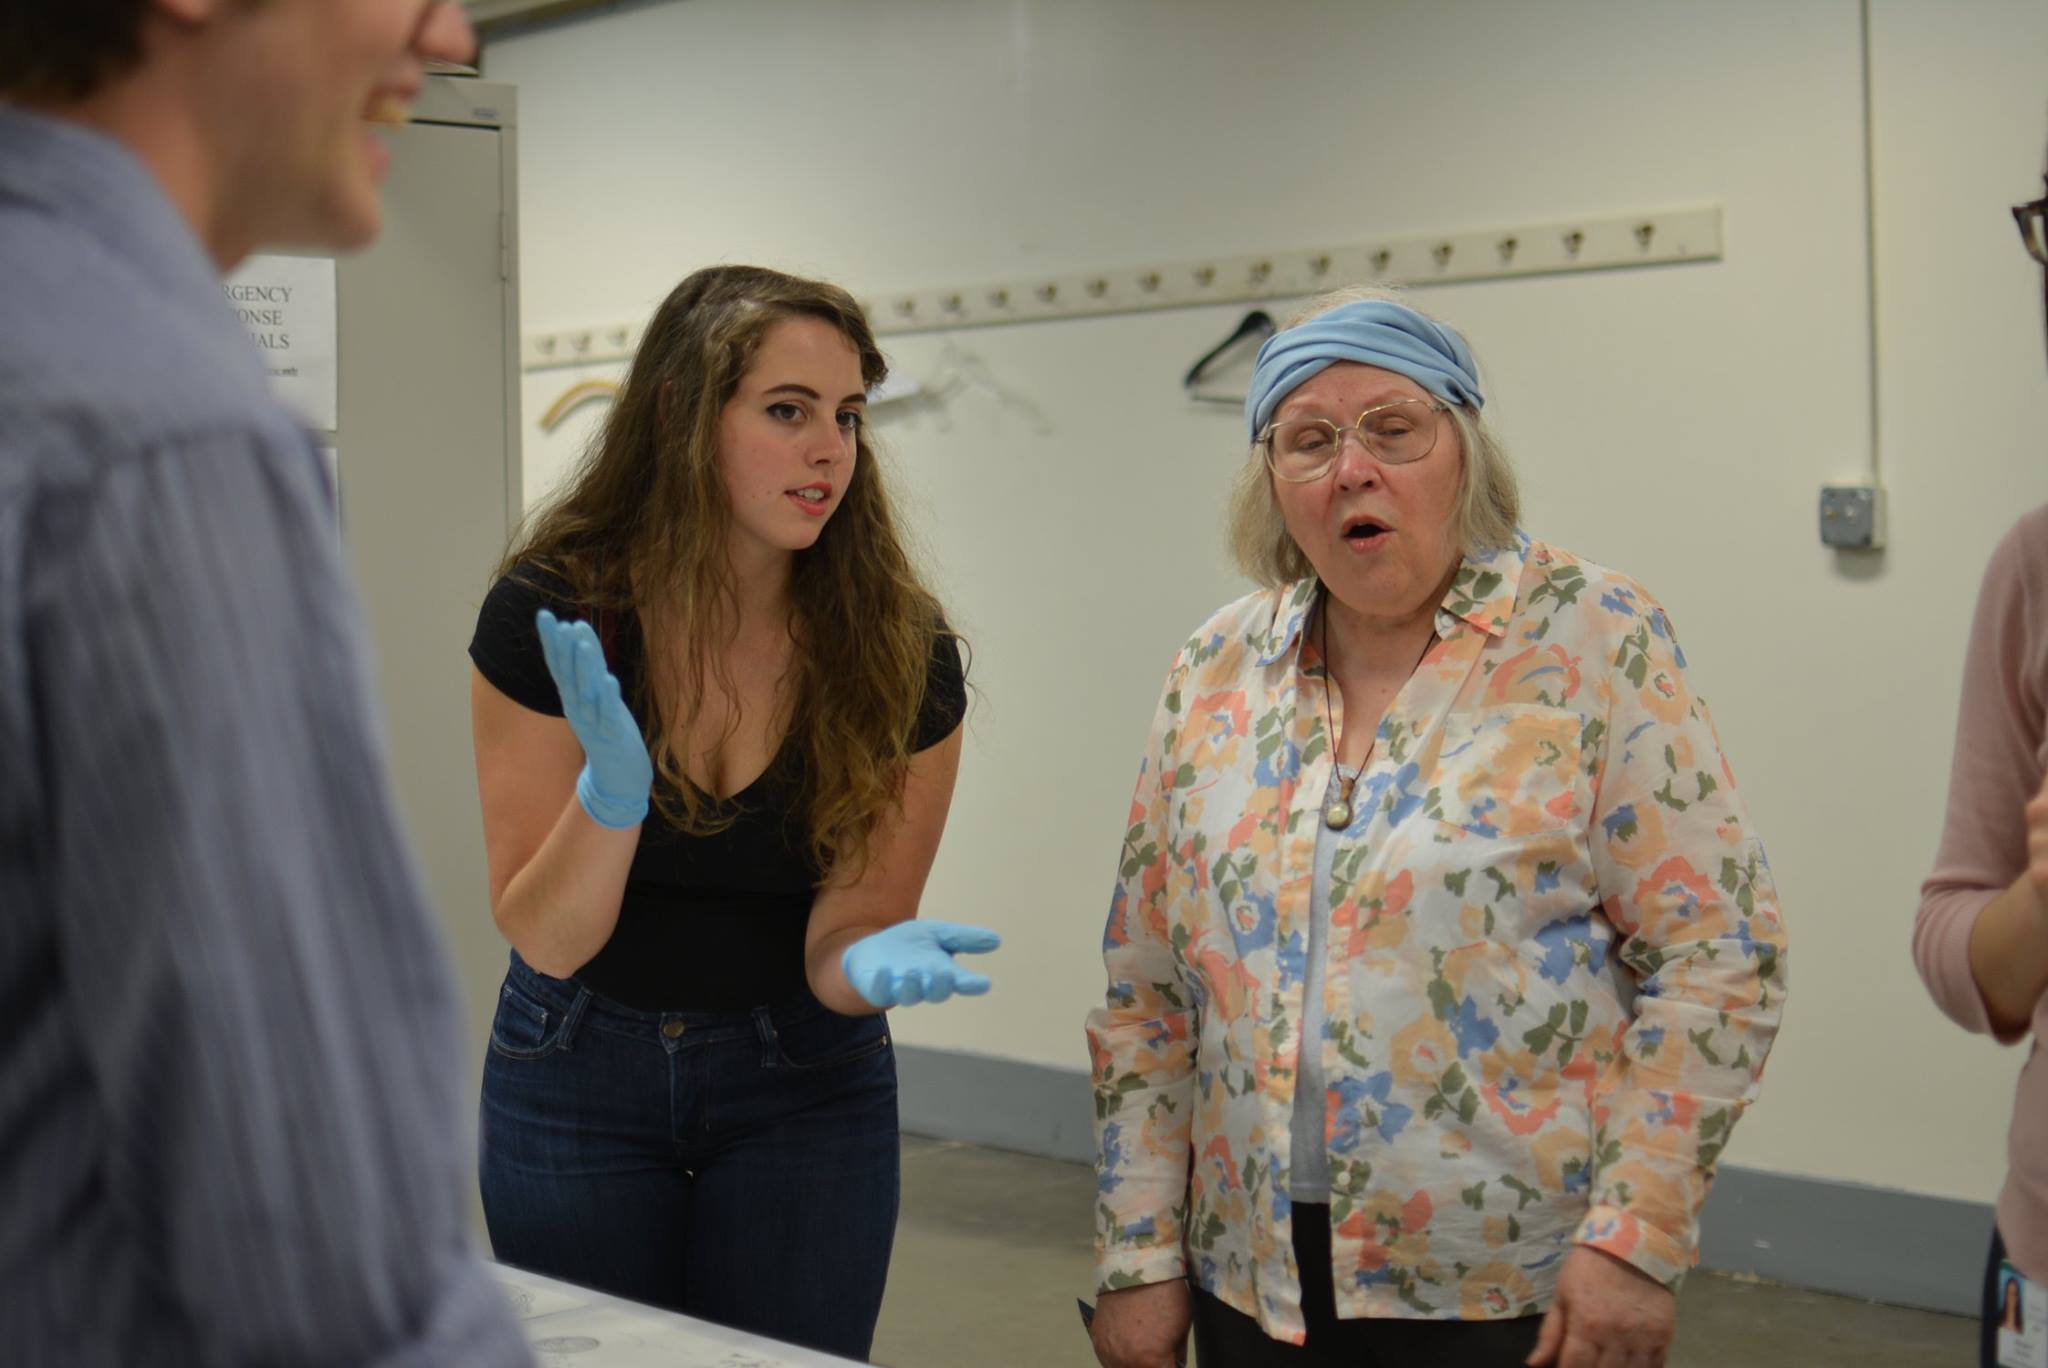 Cassie answers a guest's question about the artifacts on display. (c) Field Museum of Natural History - CC BY-NC 4.0